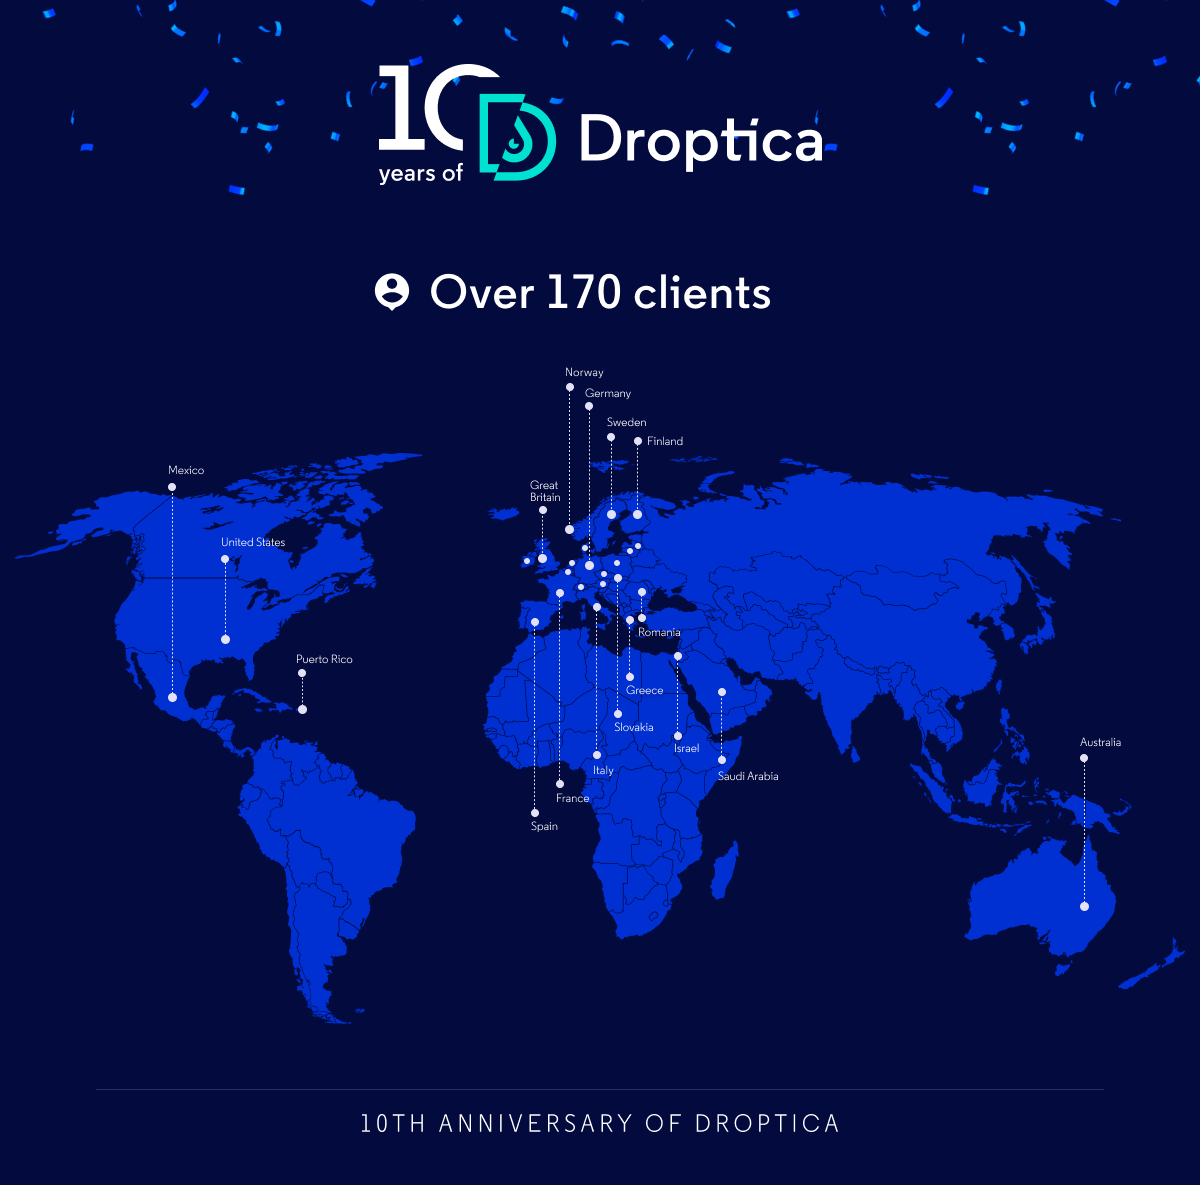 Over the course of 10 years, Droptica cooperated with more than 170 clients from around the world